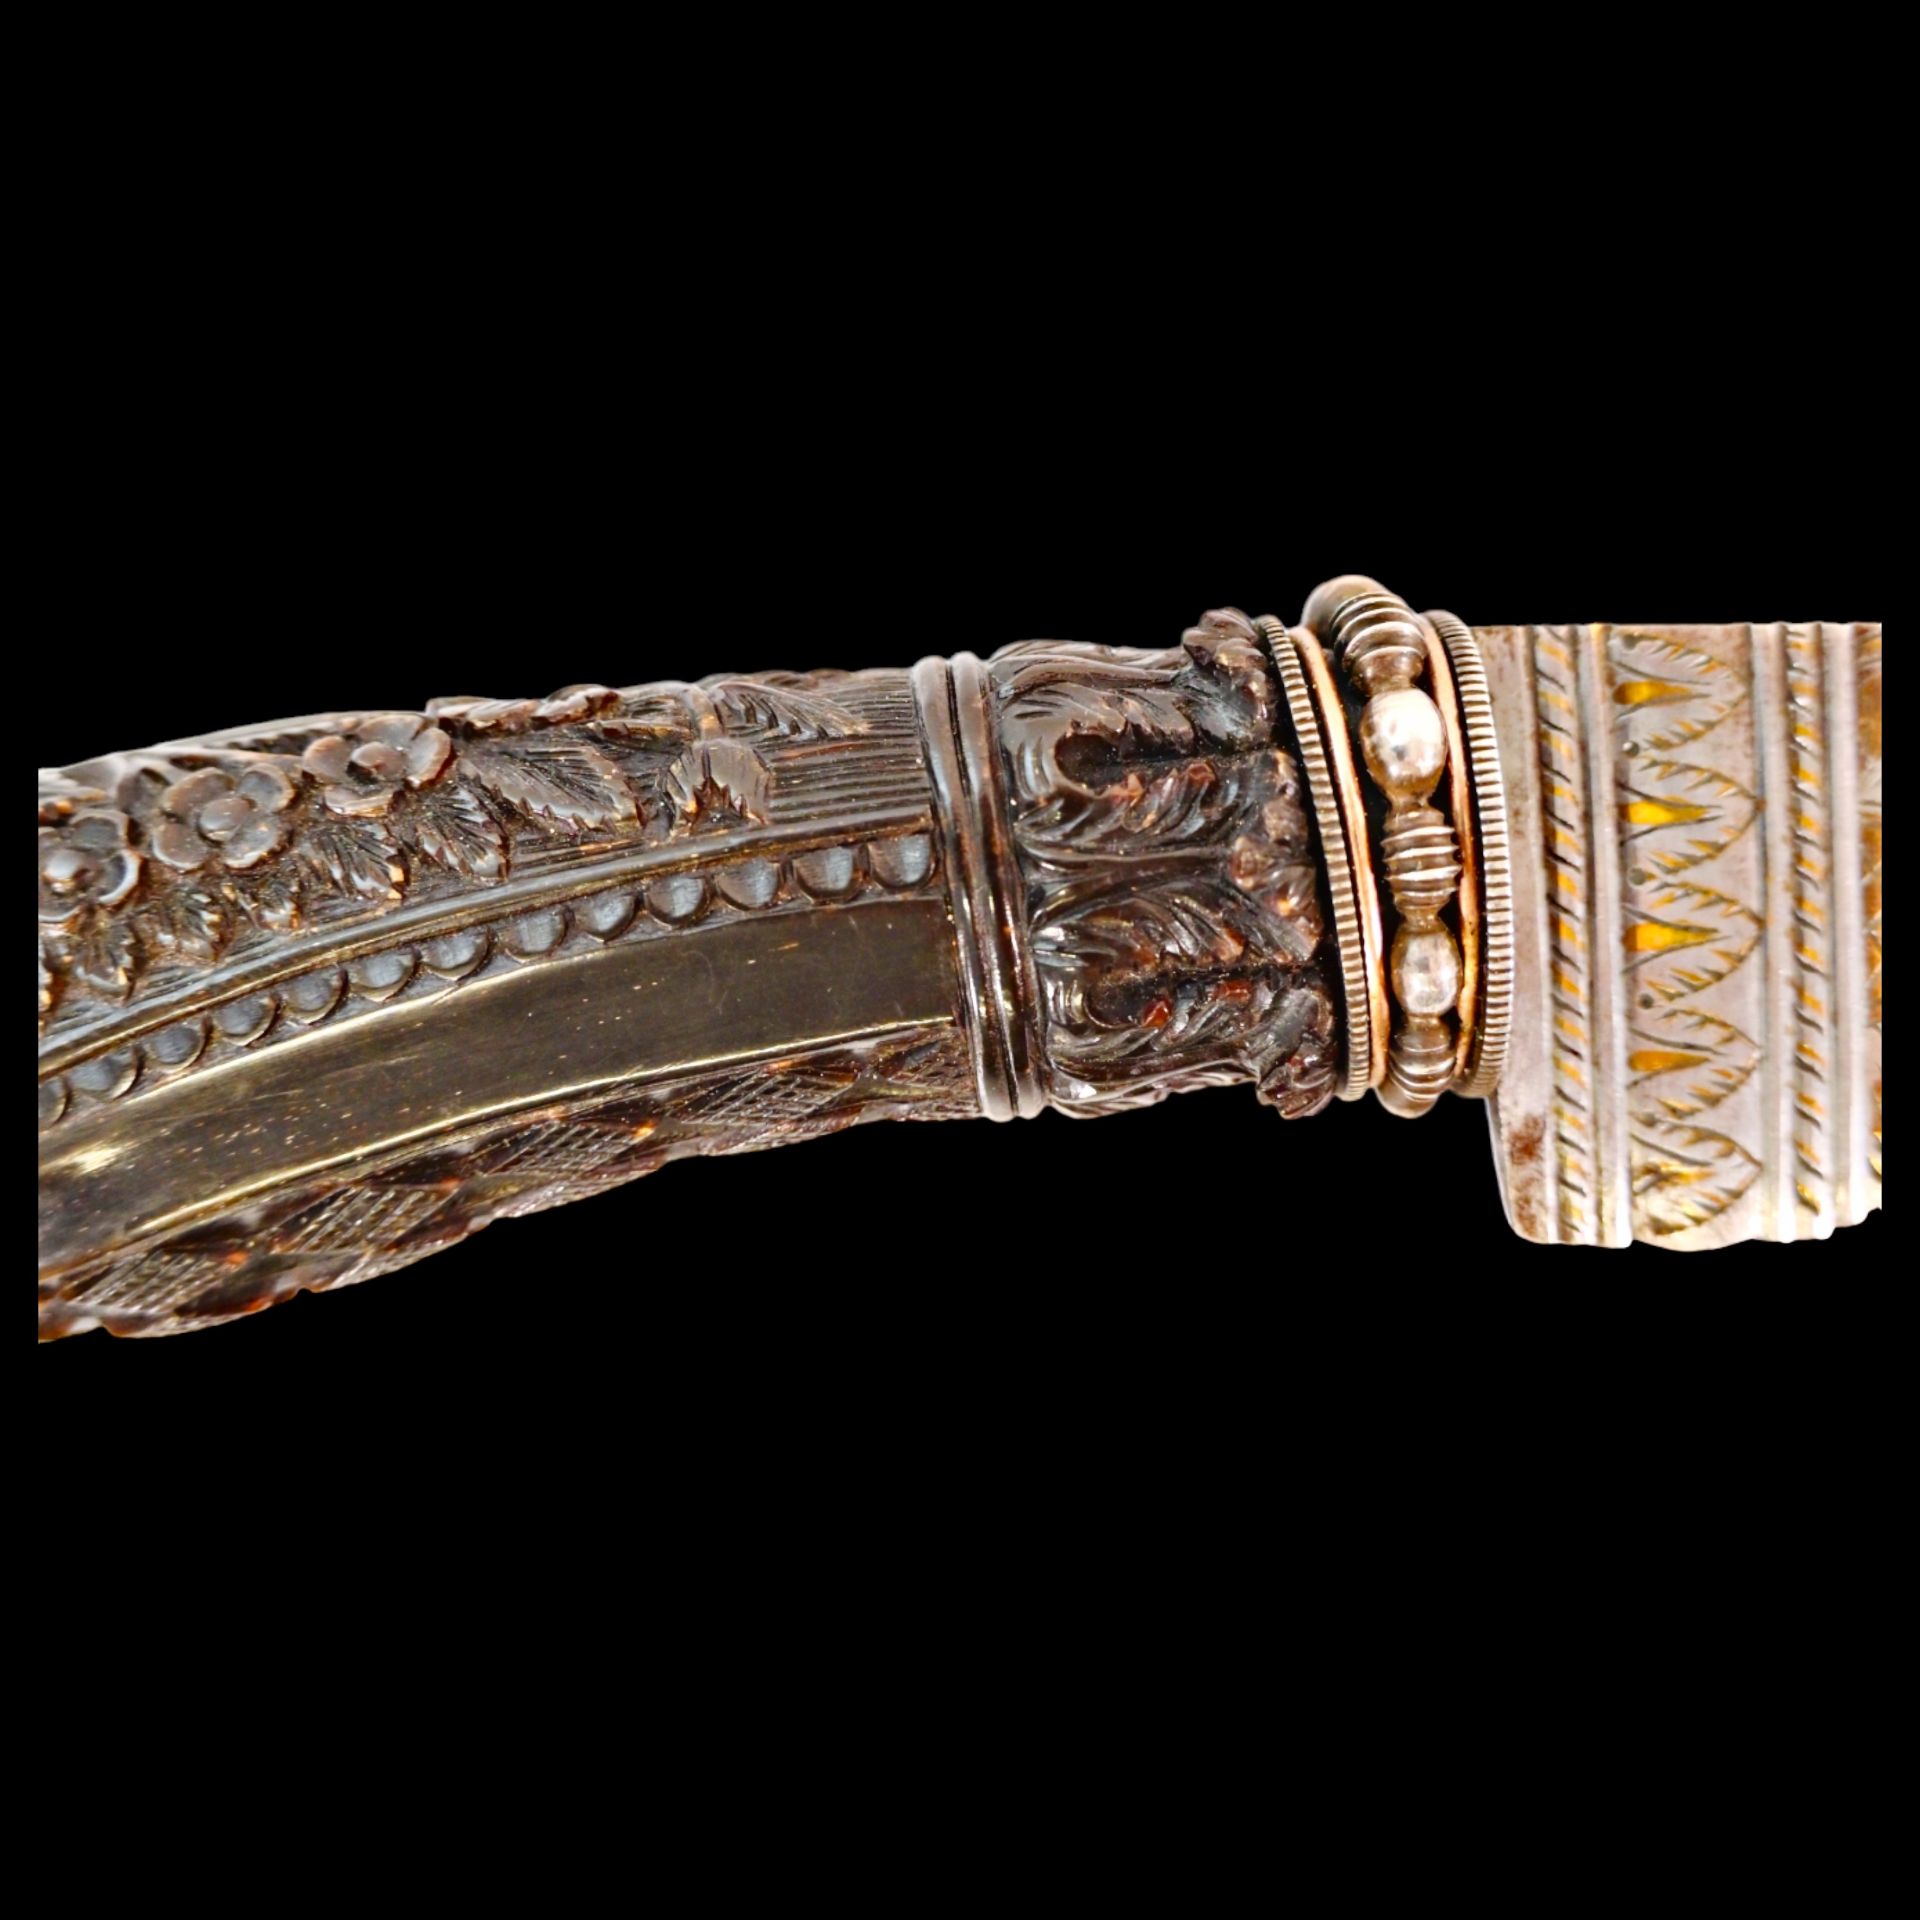 Magnificent, richly decorated knife, Indonesia, first half of the 20th century. - Image 24 of 33